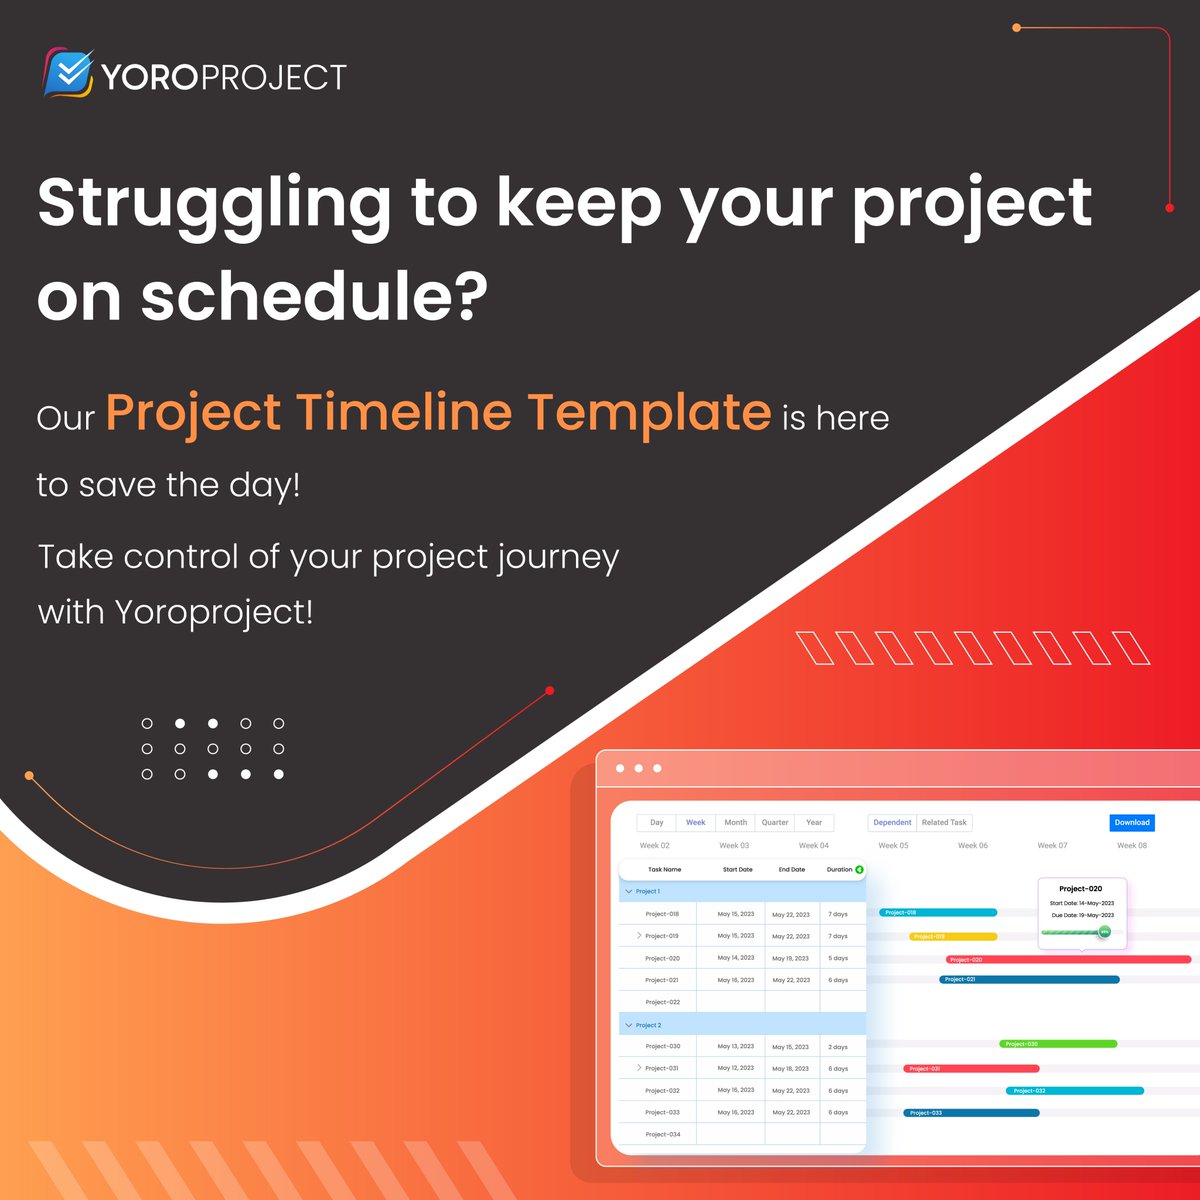 Boost your project efficiency with our easy-to-use #ProjectTimeline Template!

Easily visualize deadlines, track progress, and ensure timely delivery with our user-friendly template!

Stay on track and hit your project milestones with ease!

Download now: yoroflow.com/project-timeli…